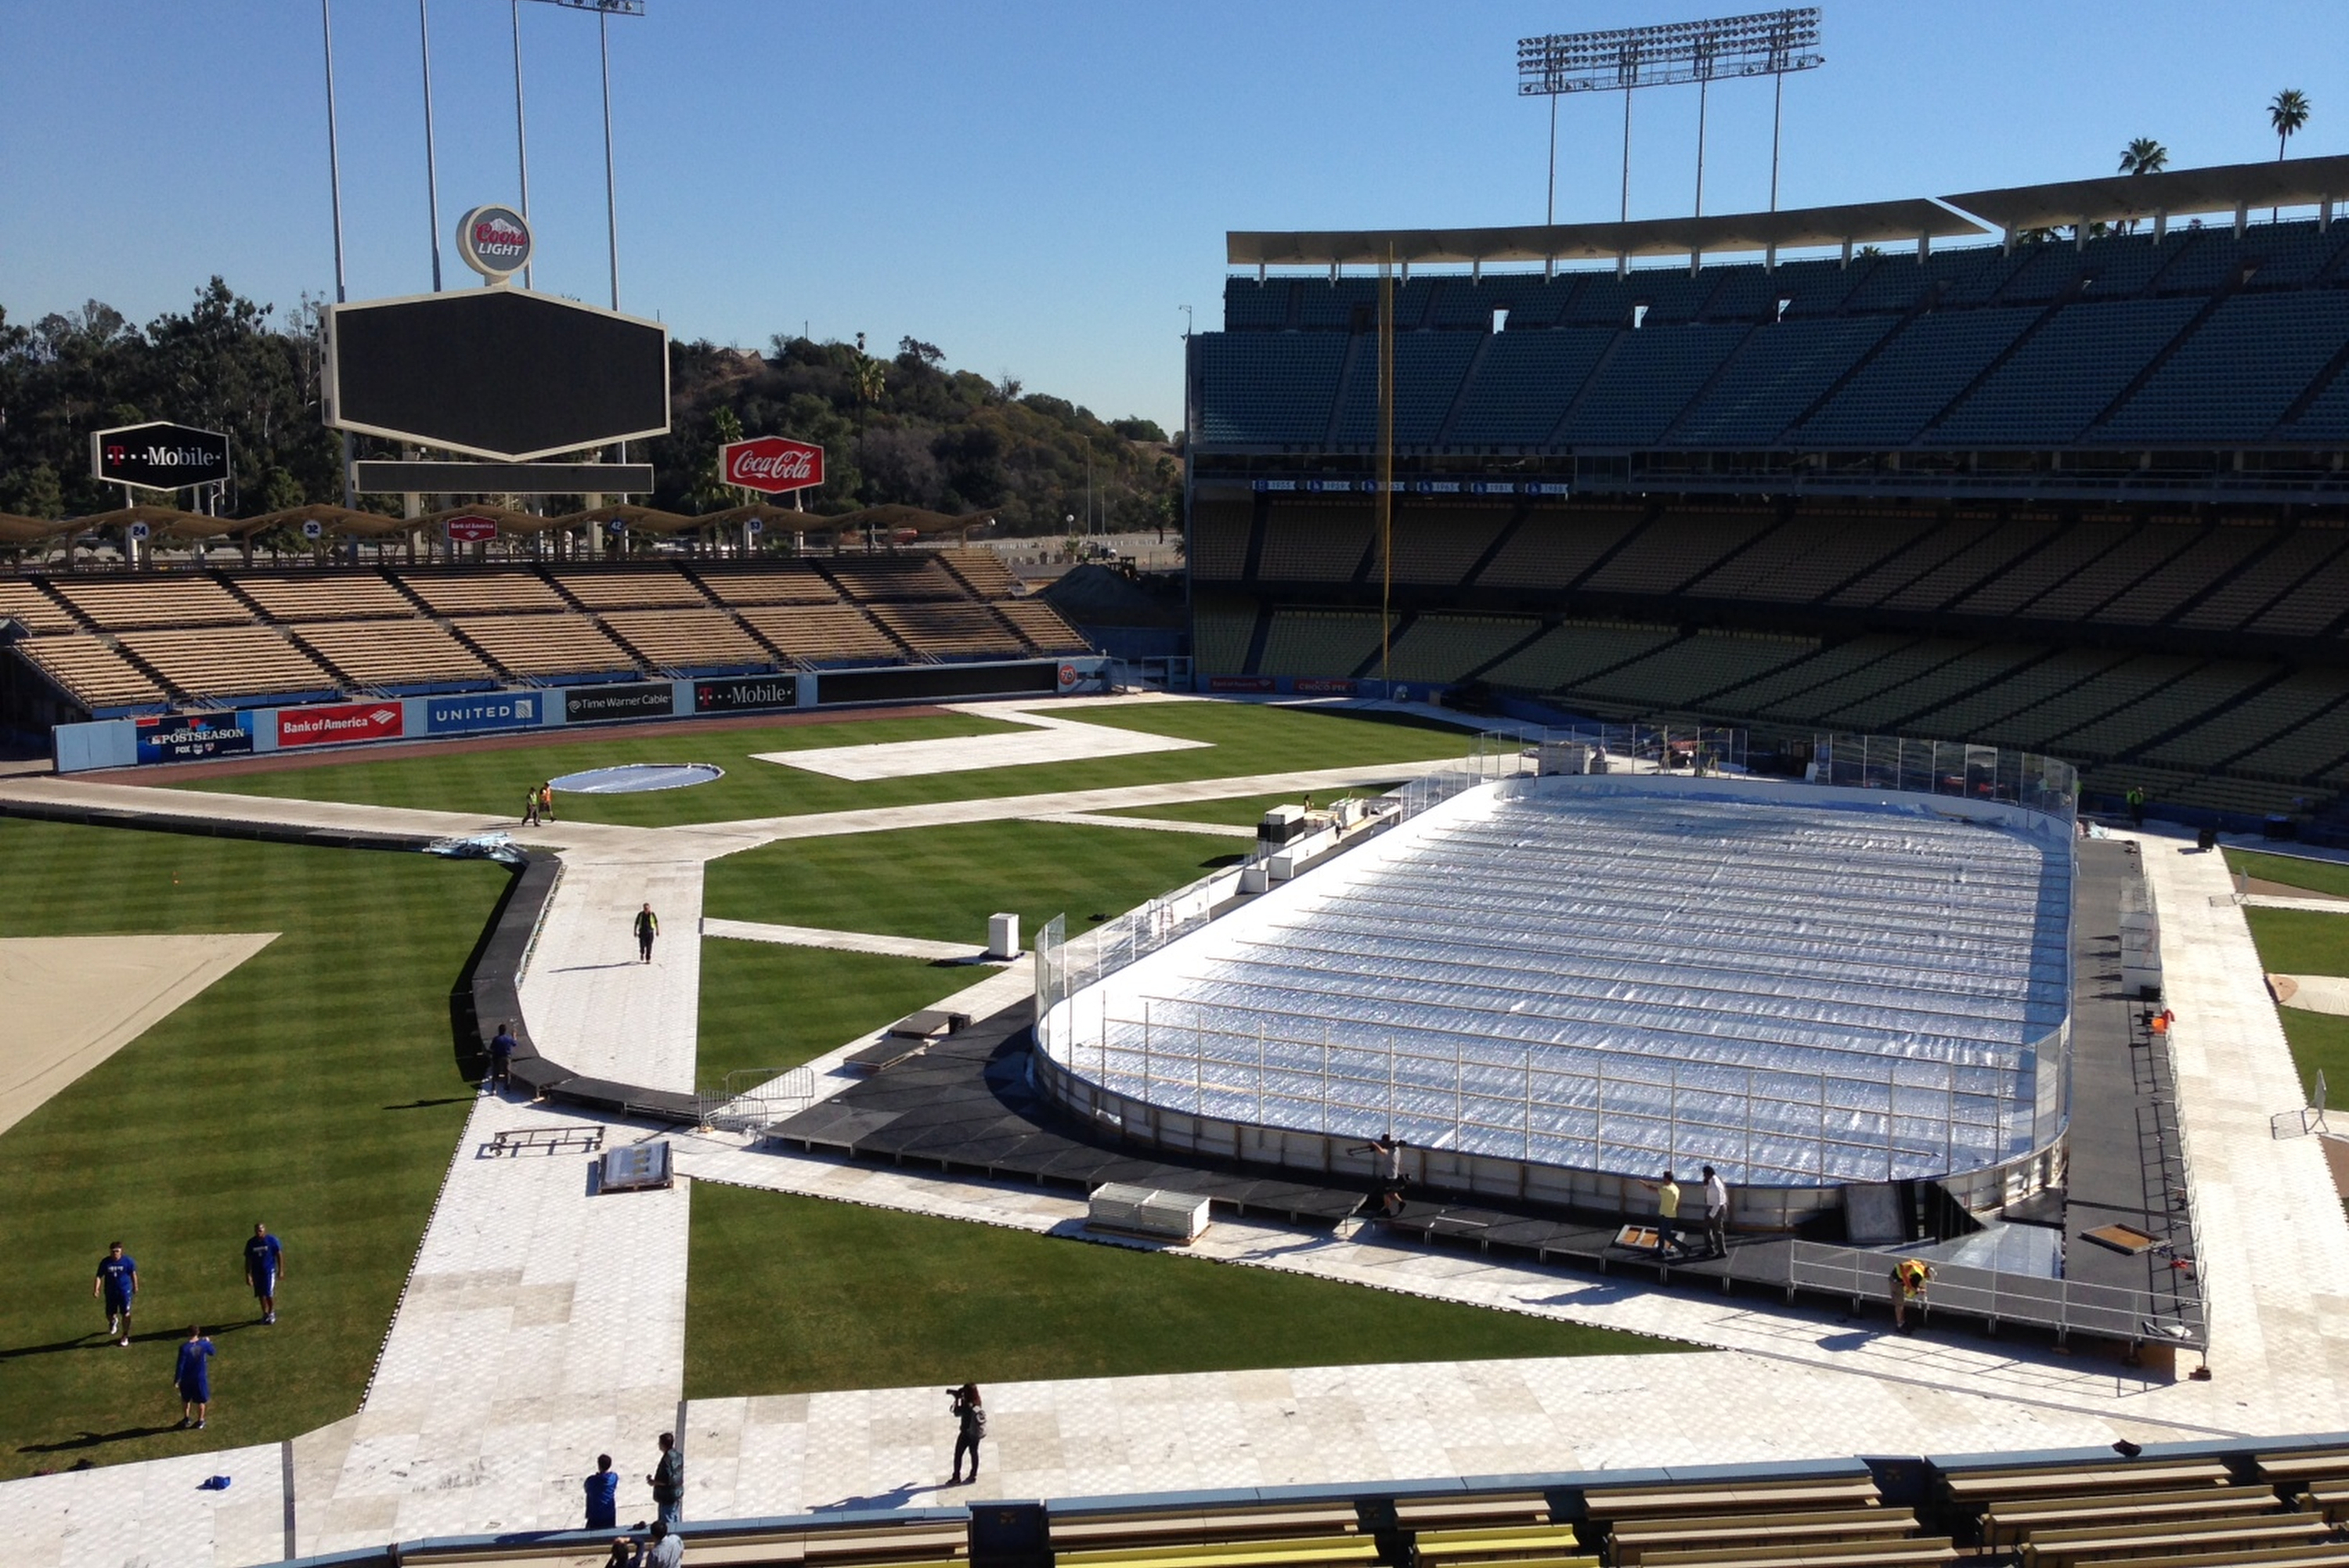 dodgers stadium hockey, I will be there to see the Ducks @ Kings on  Saturday, January 25, 2014!!